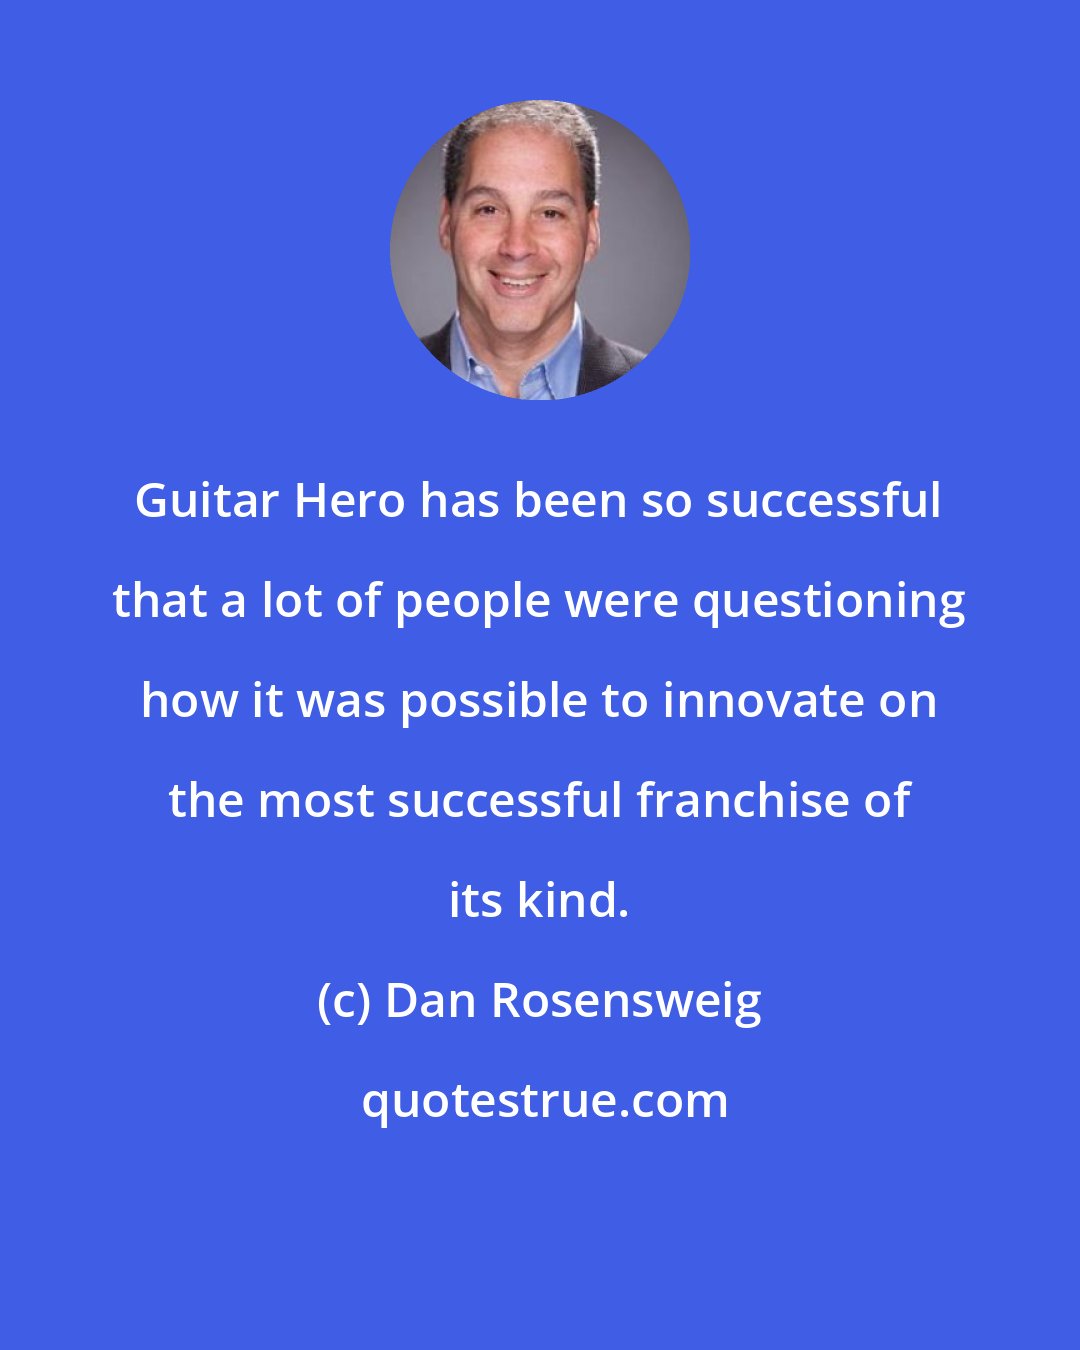 Dan Rosensweig: Guitar Hero has been so successful that a lot of people were questioning how it was possible to innovate on the most successful franchise of its kind.